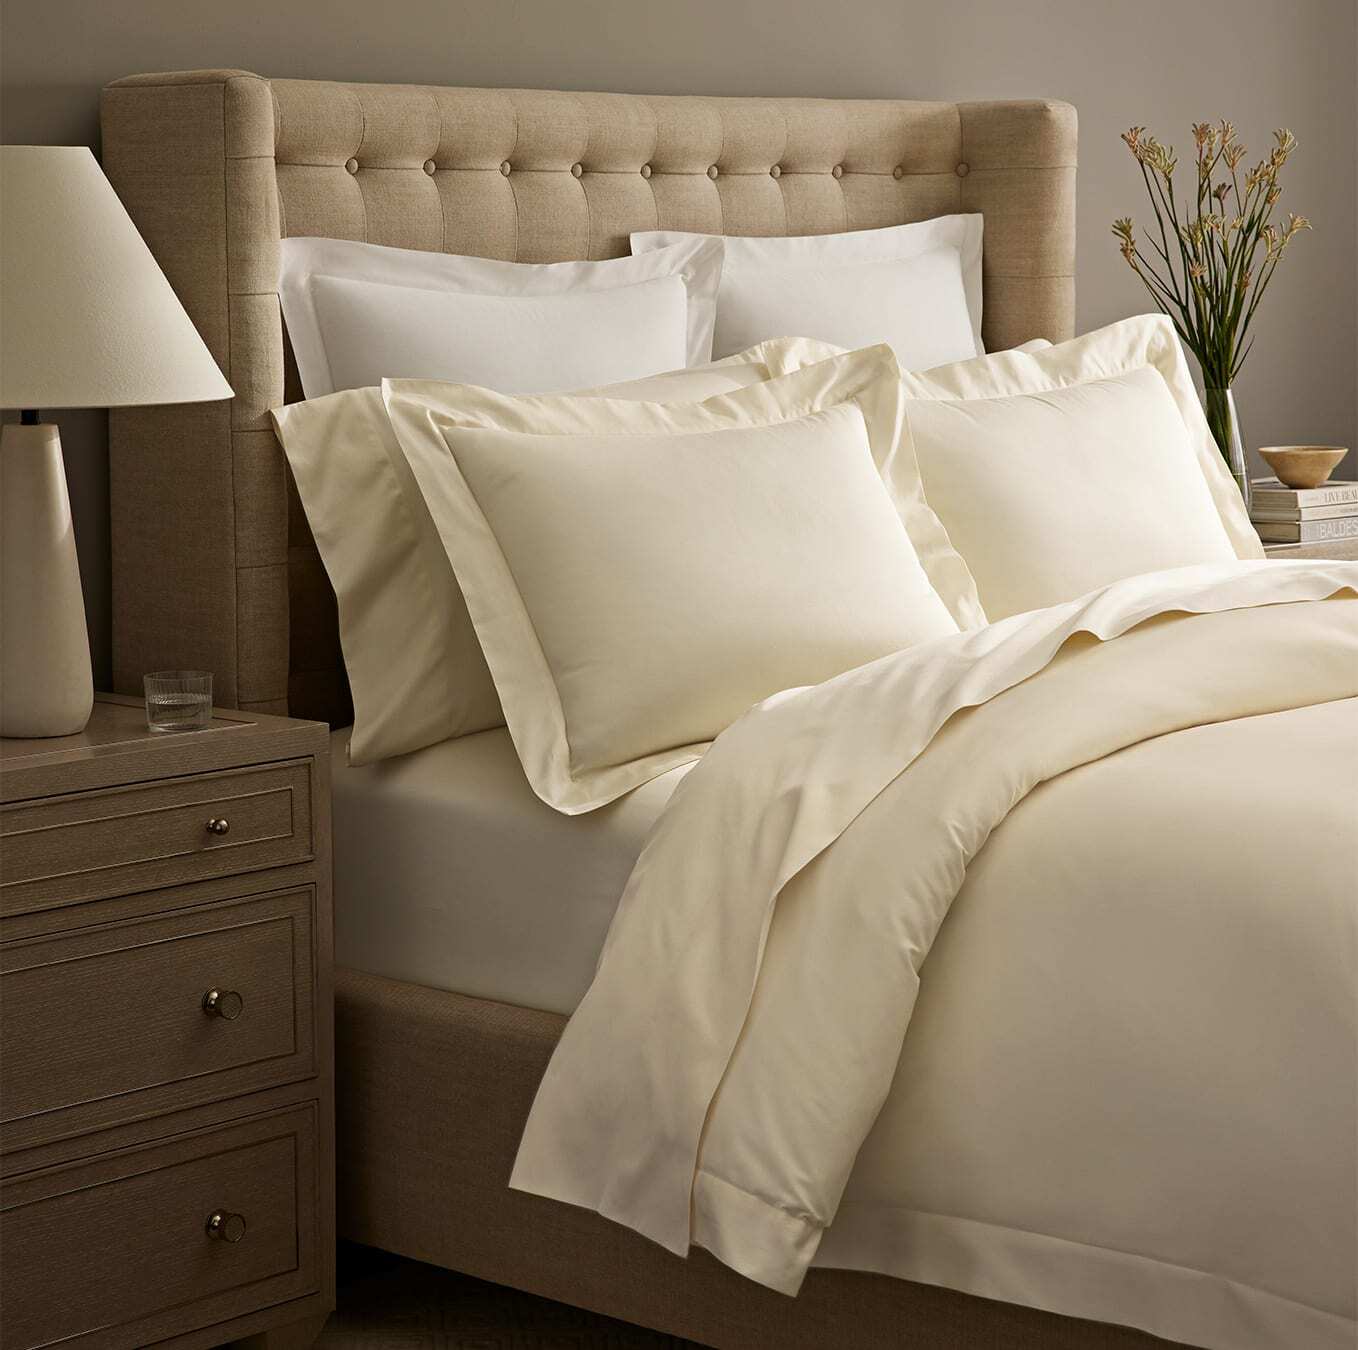 Warm Silky Ivory Sheets Will Be A Perfect Match With Your Gray Comforter